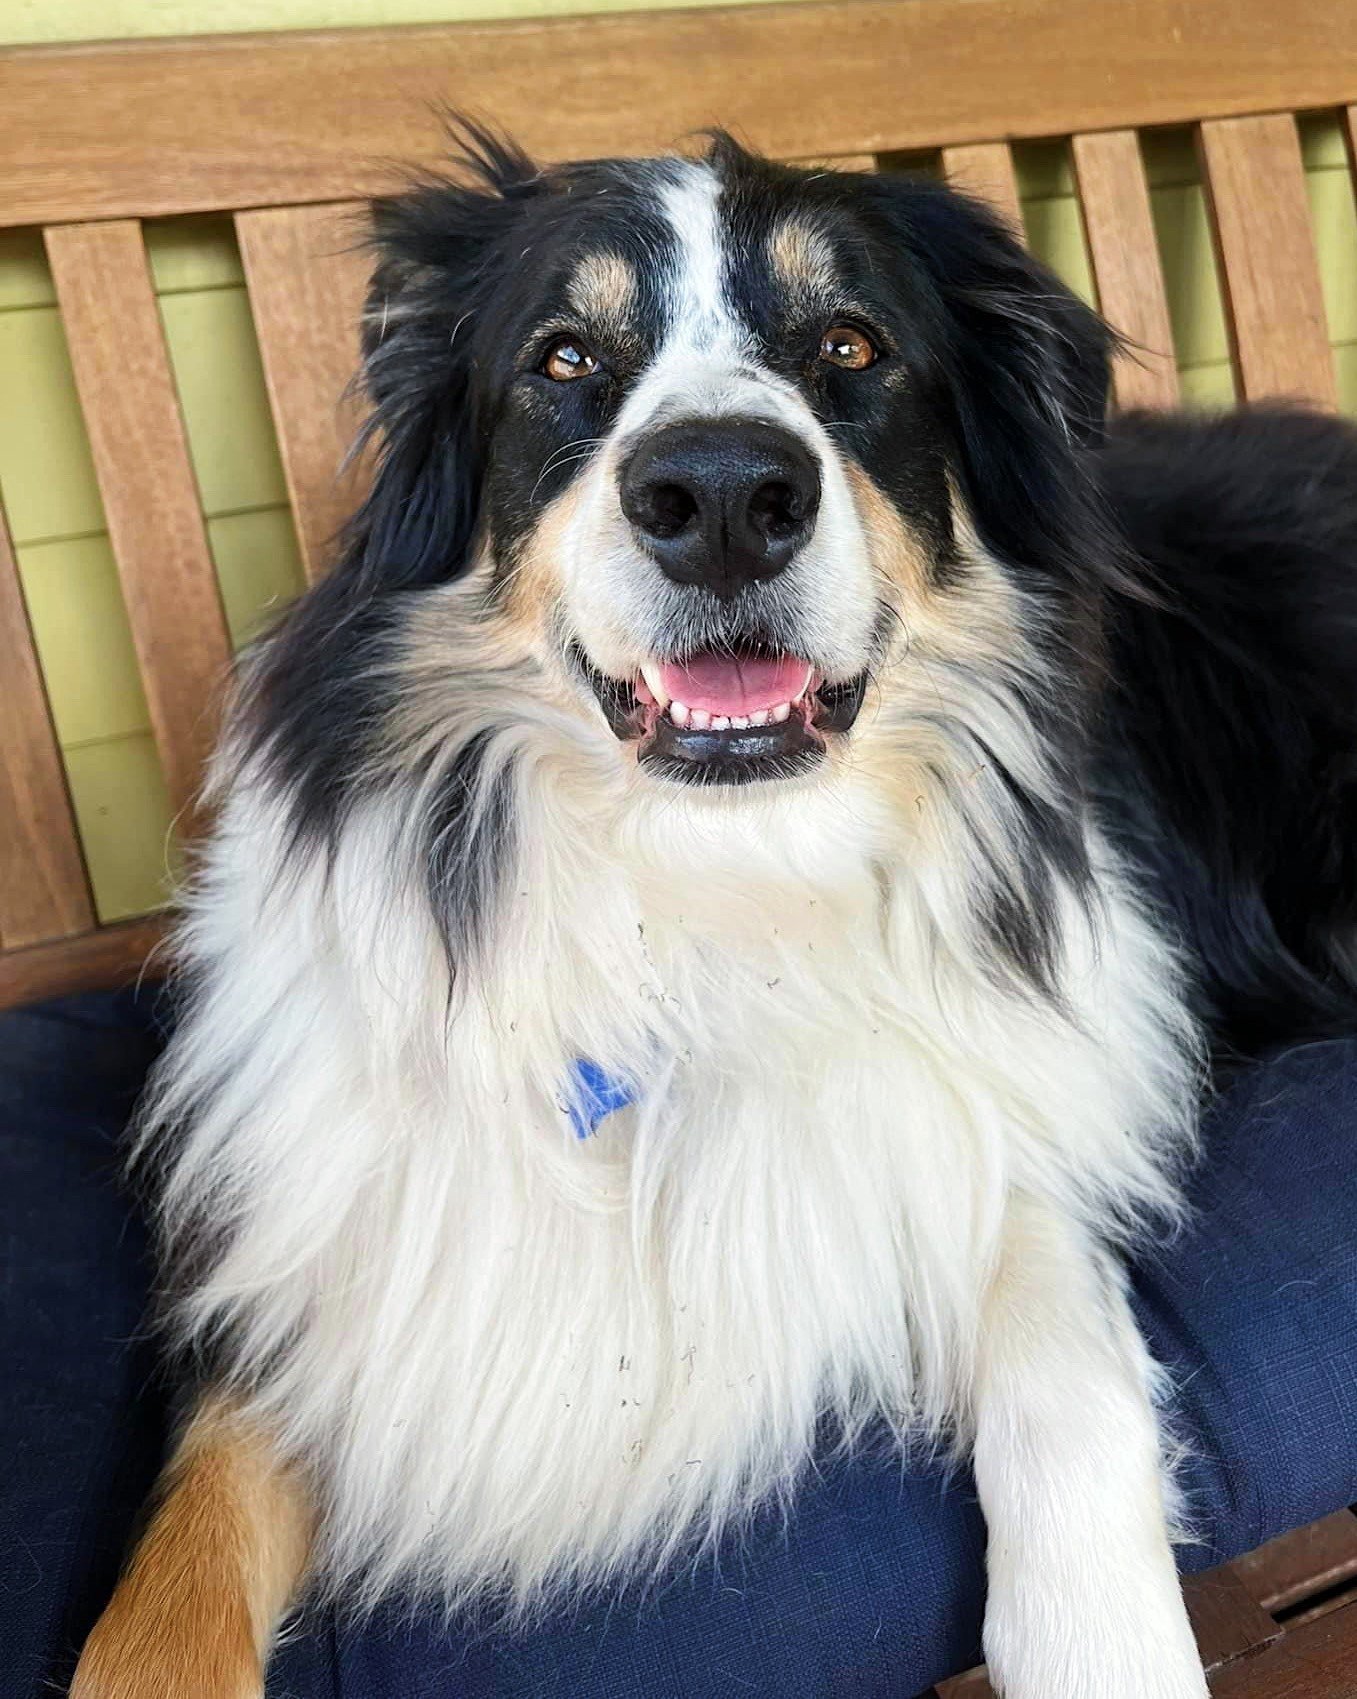 Where are our Aussie people at? ⁠
⁠
Tucker came to us from our rescue partner Clackamas County Dog Services in mid March, and has been thriving in foster since without much adoption interest. Goofy, snuggly, and a big fan of toys (you should see him 